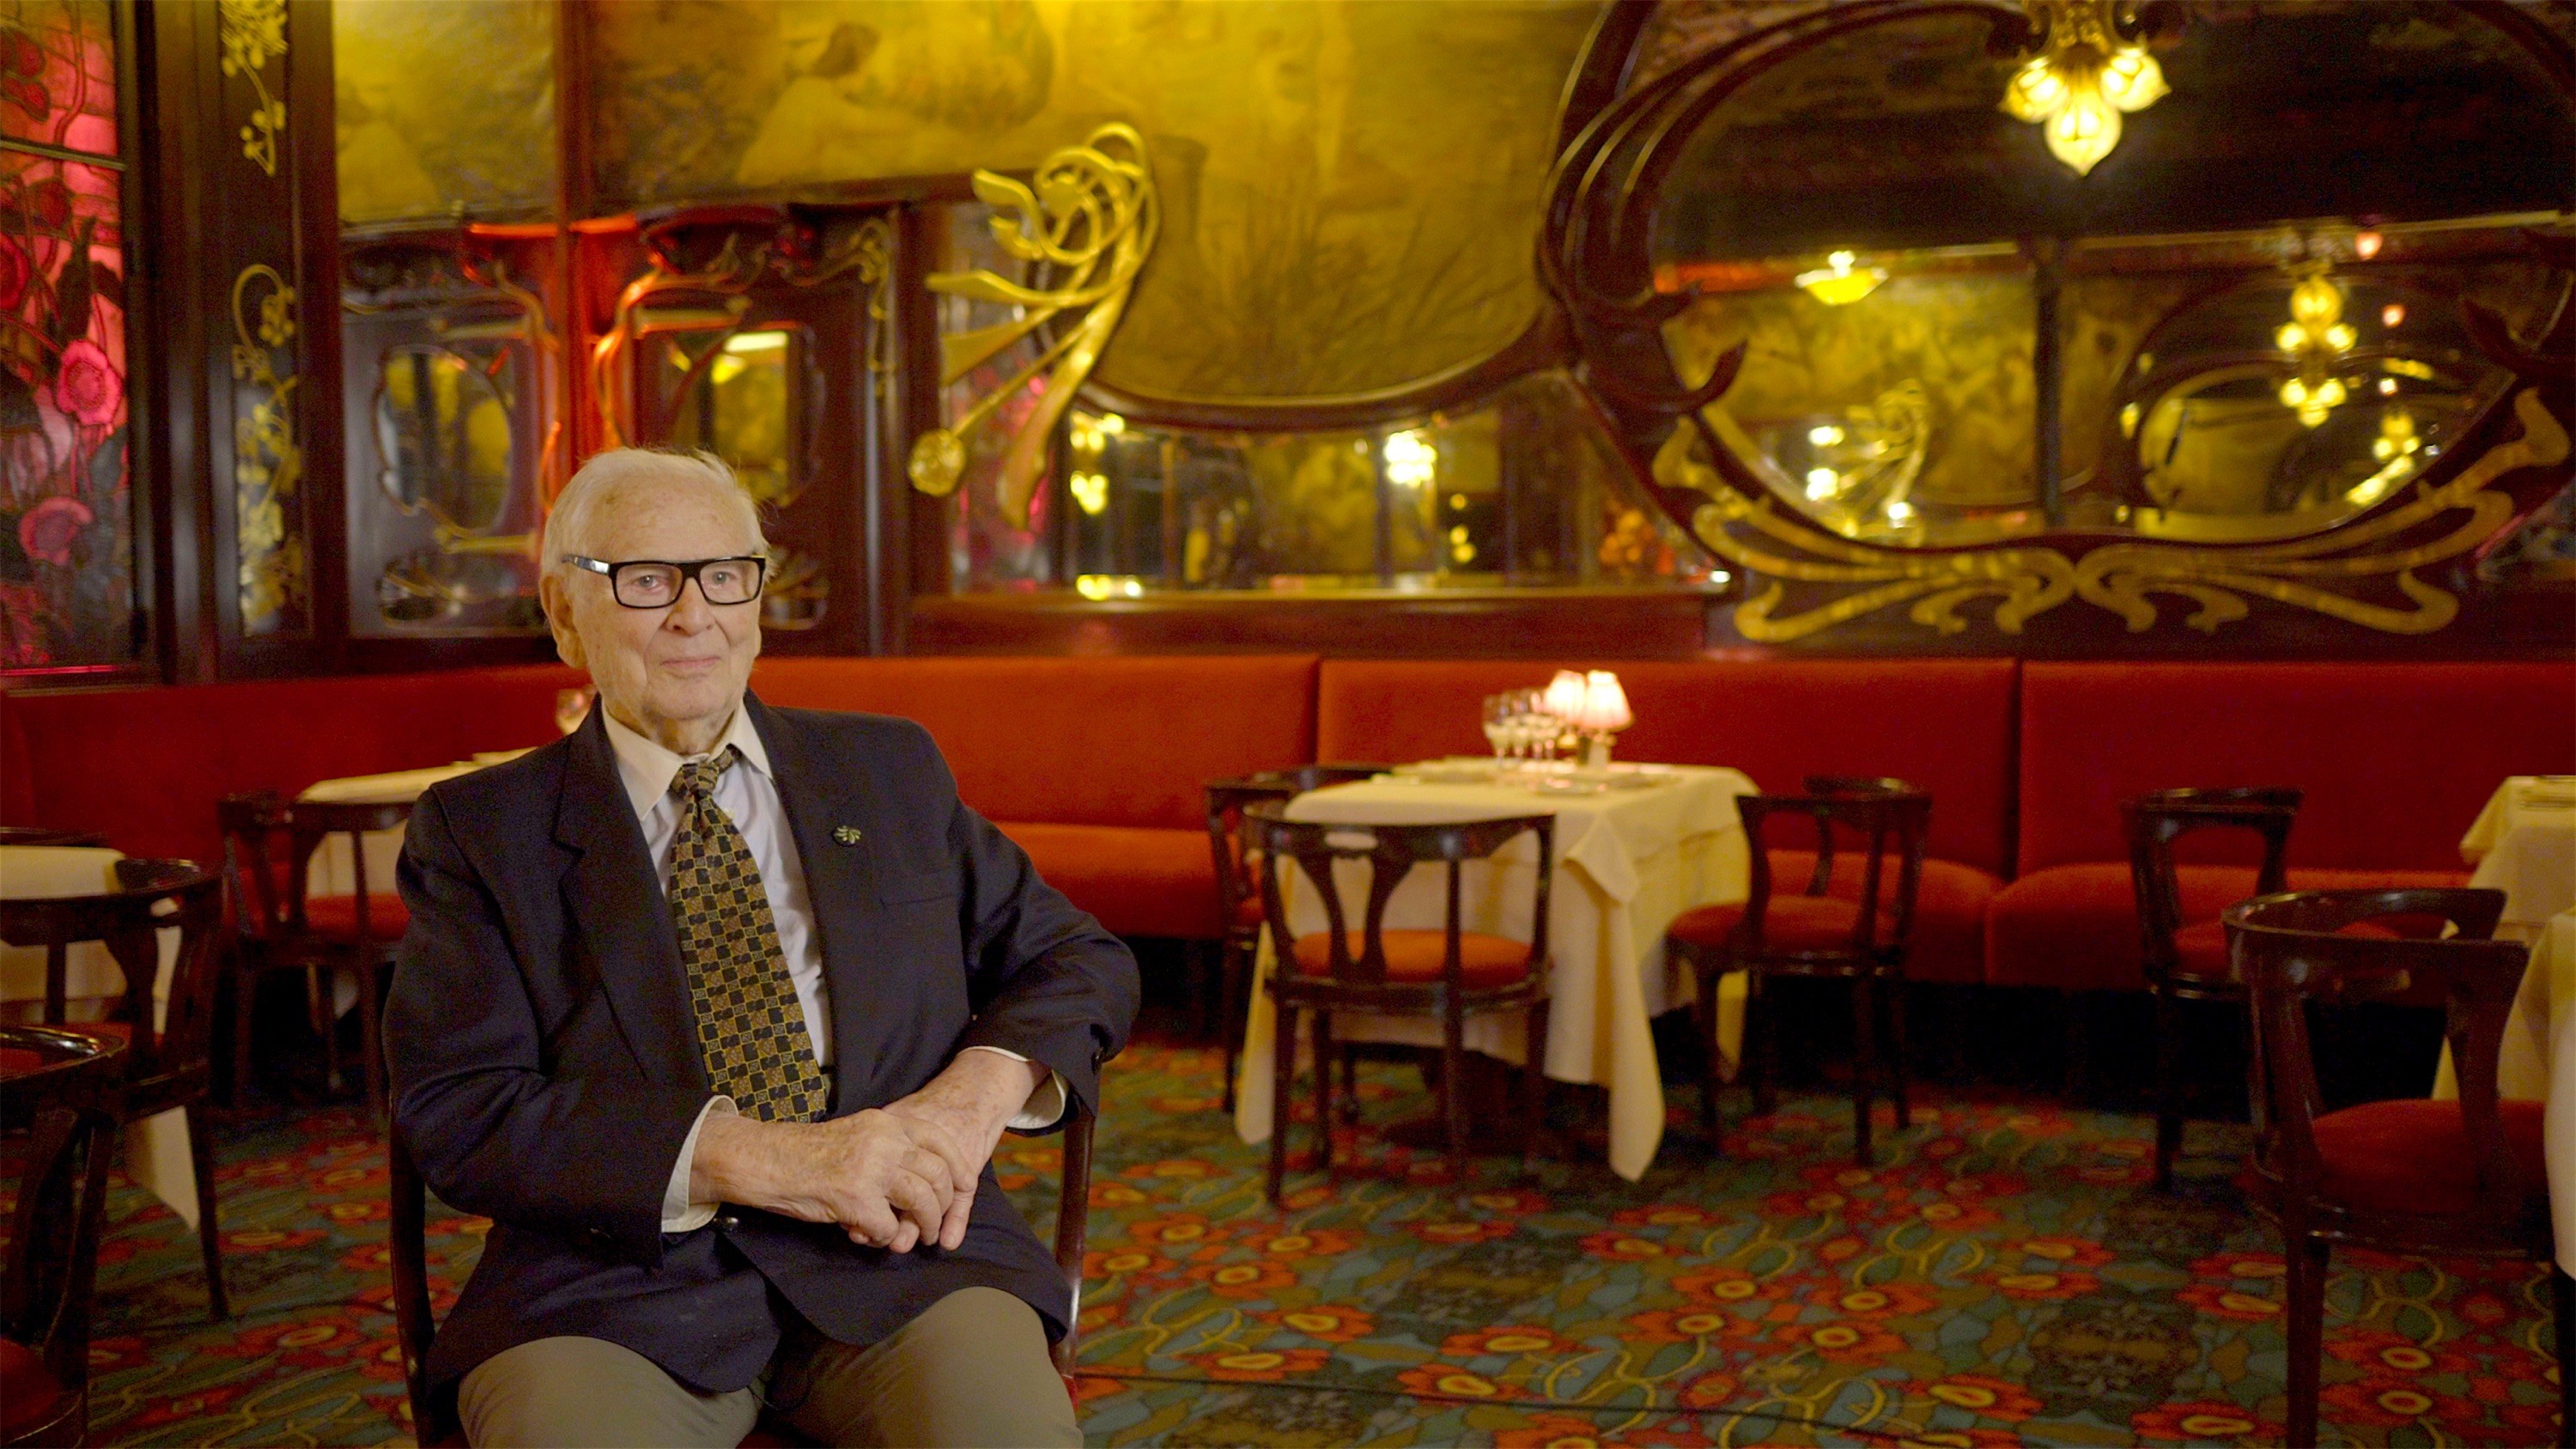 French designer Pierre Cardin is the subject of new documentary House of Cardin that examines his work, his sexuality, and his work in China, Russia and Japan. Photo: House of Cardin/The Ebersole Hughes Company